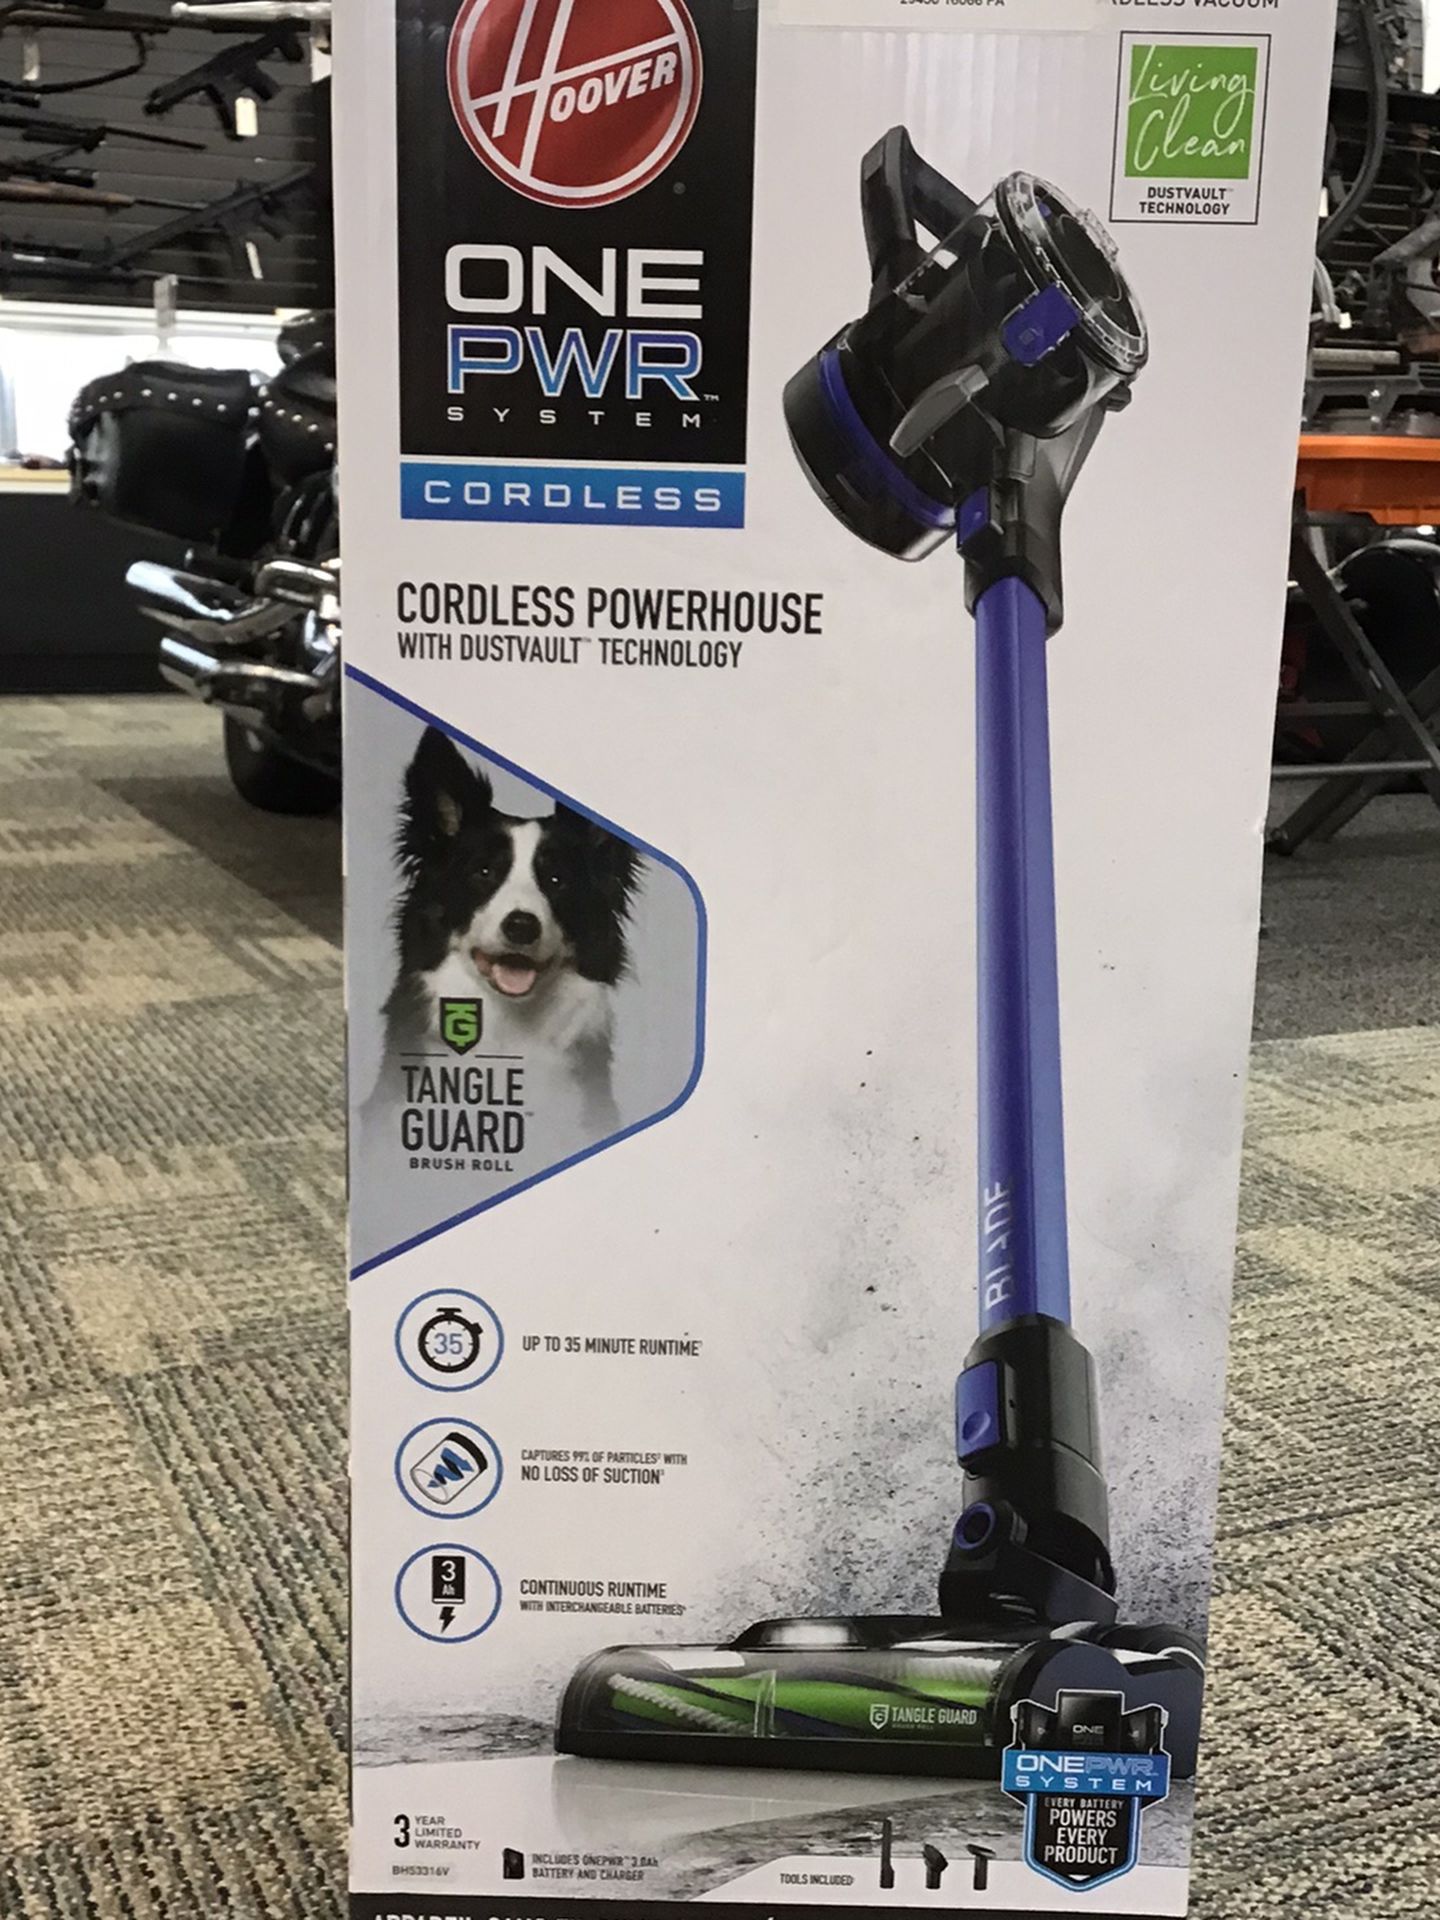  Hoover One Pwr System Cordless Vacuum 